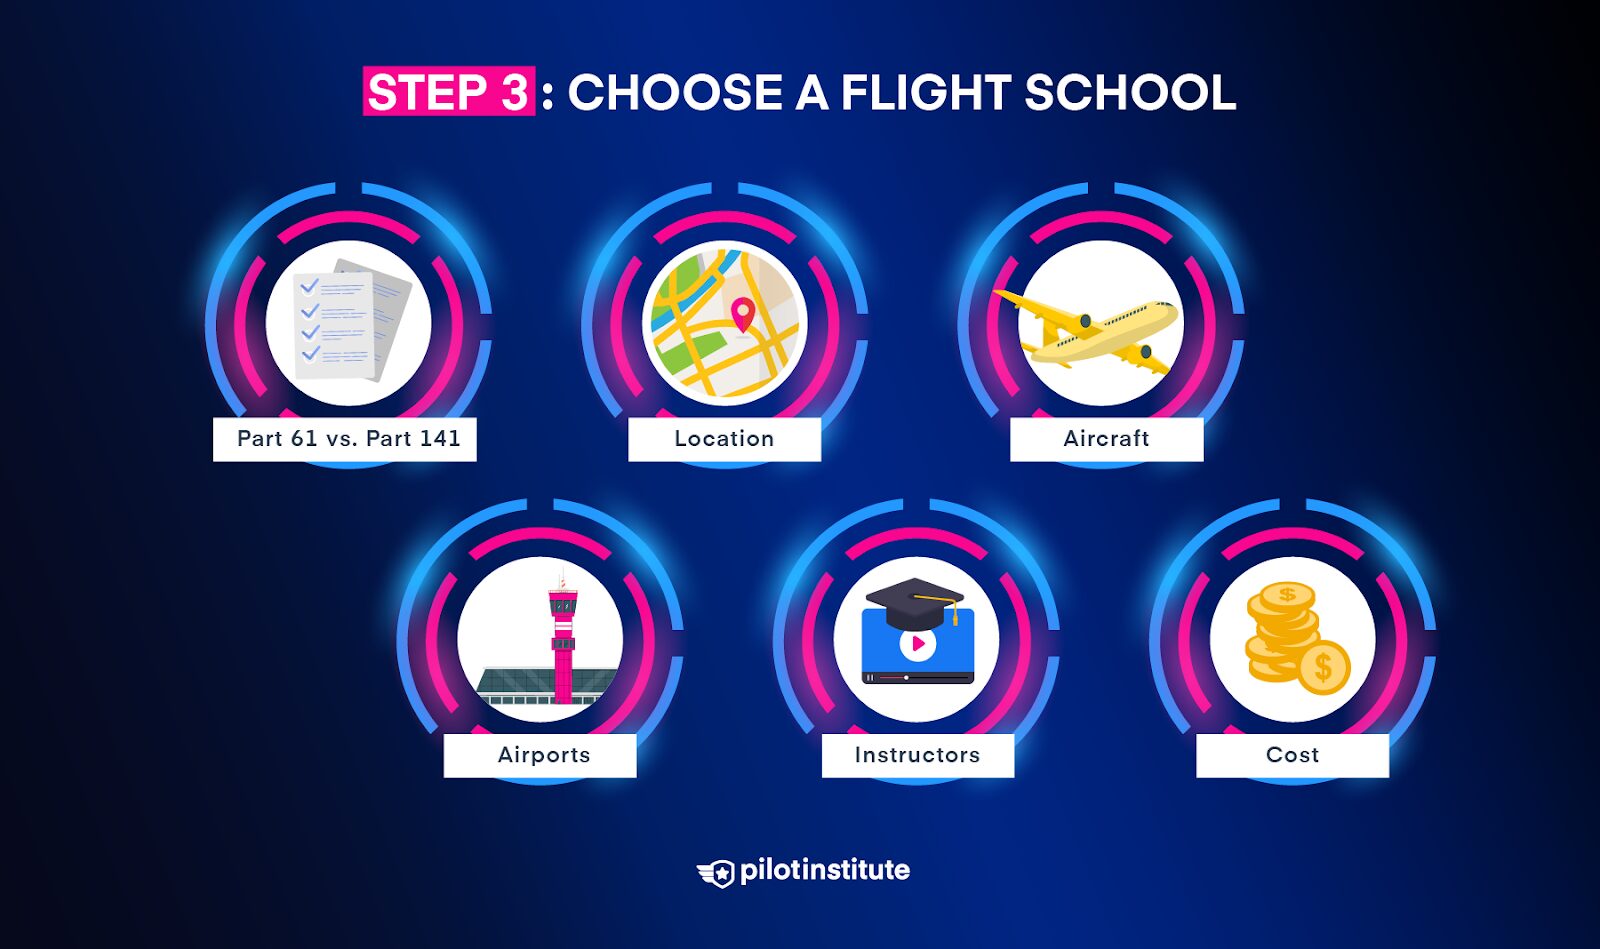 A diagram outlining what you should consider when choosing a flight school.